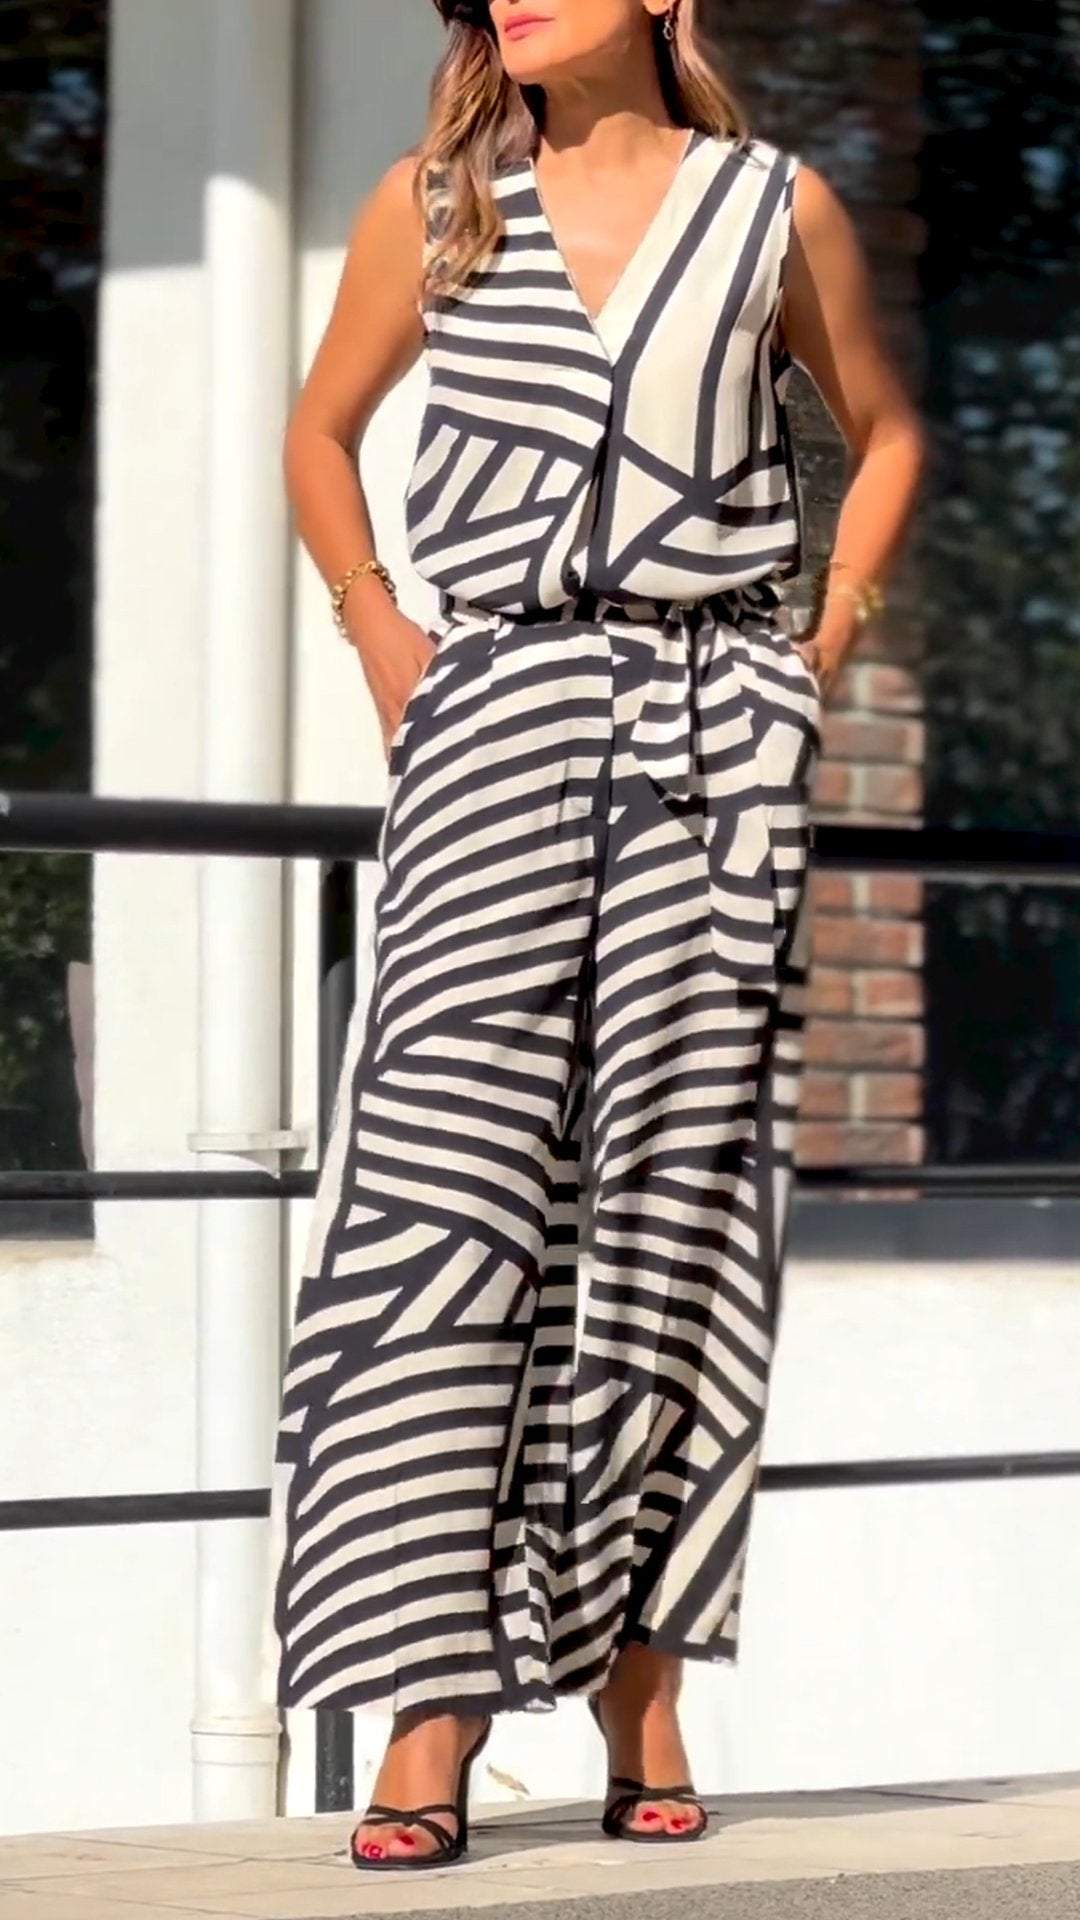 Casual V-neck Striped Two-piece Suit